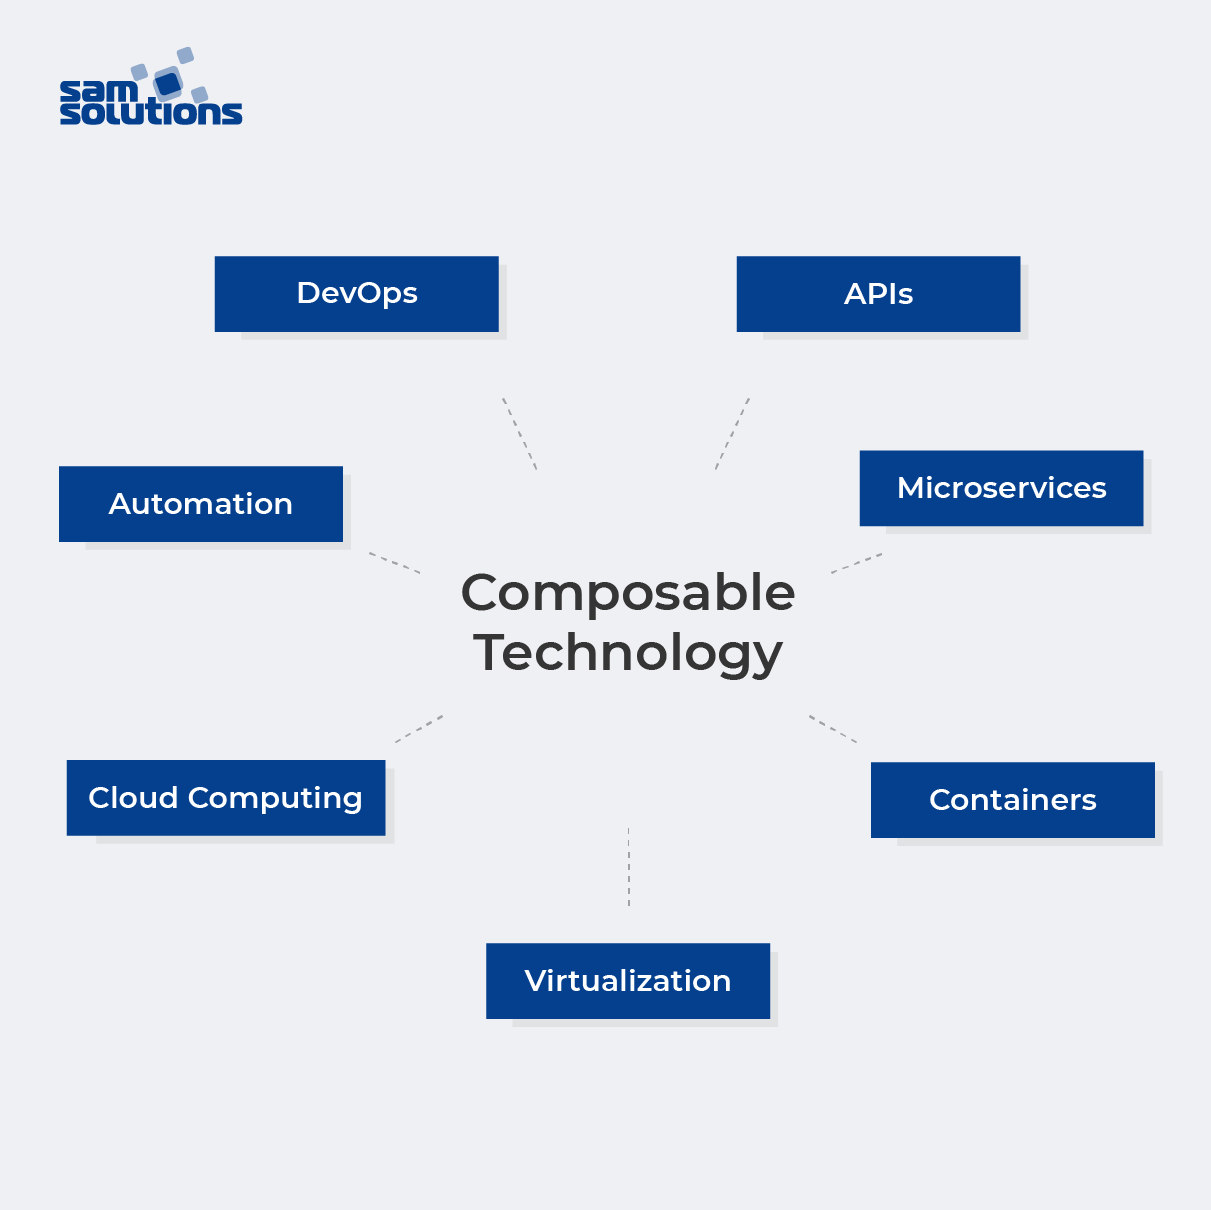 Elements of composable technology